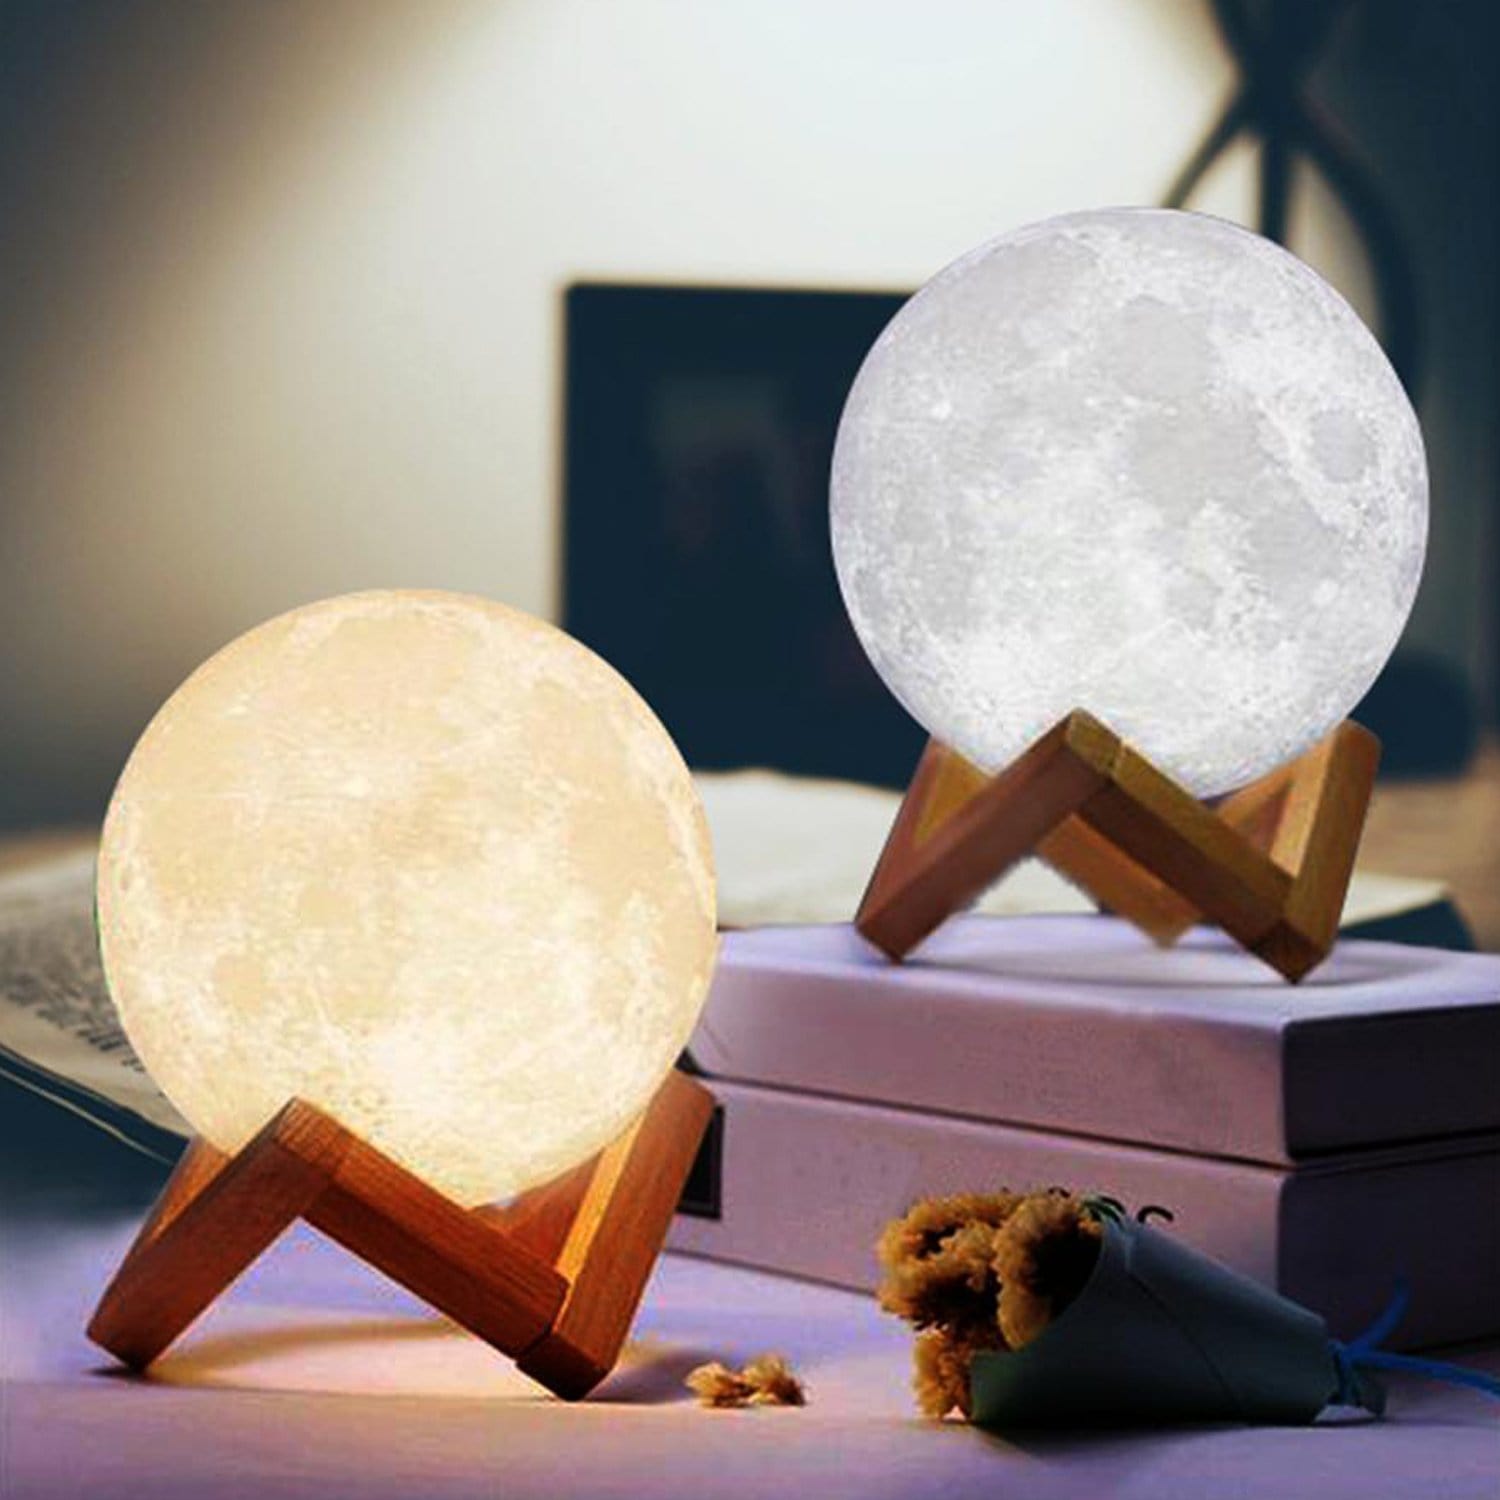 Moon Lamp To My Wife I Love You Always & Forever - 3D LED Engraving Moon Lamp GiveMe-Gifts